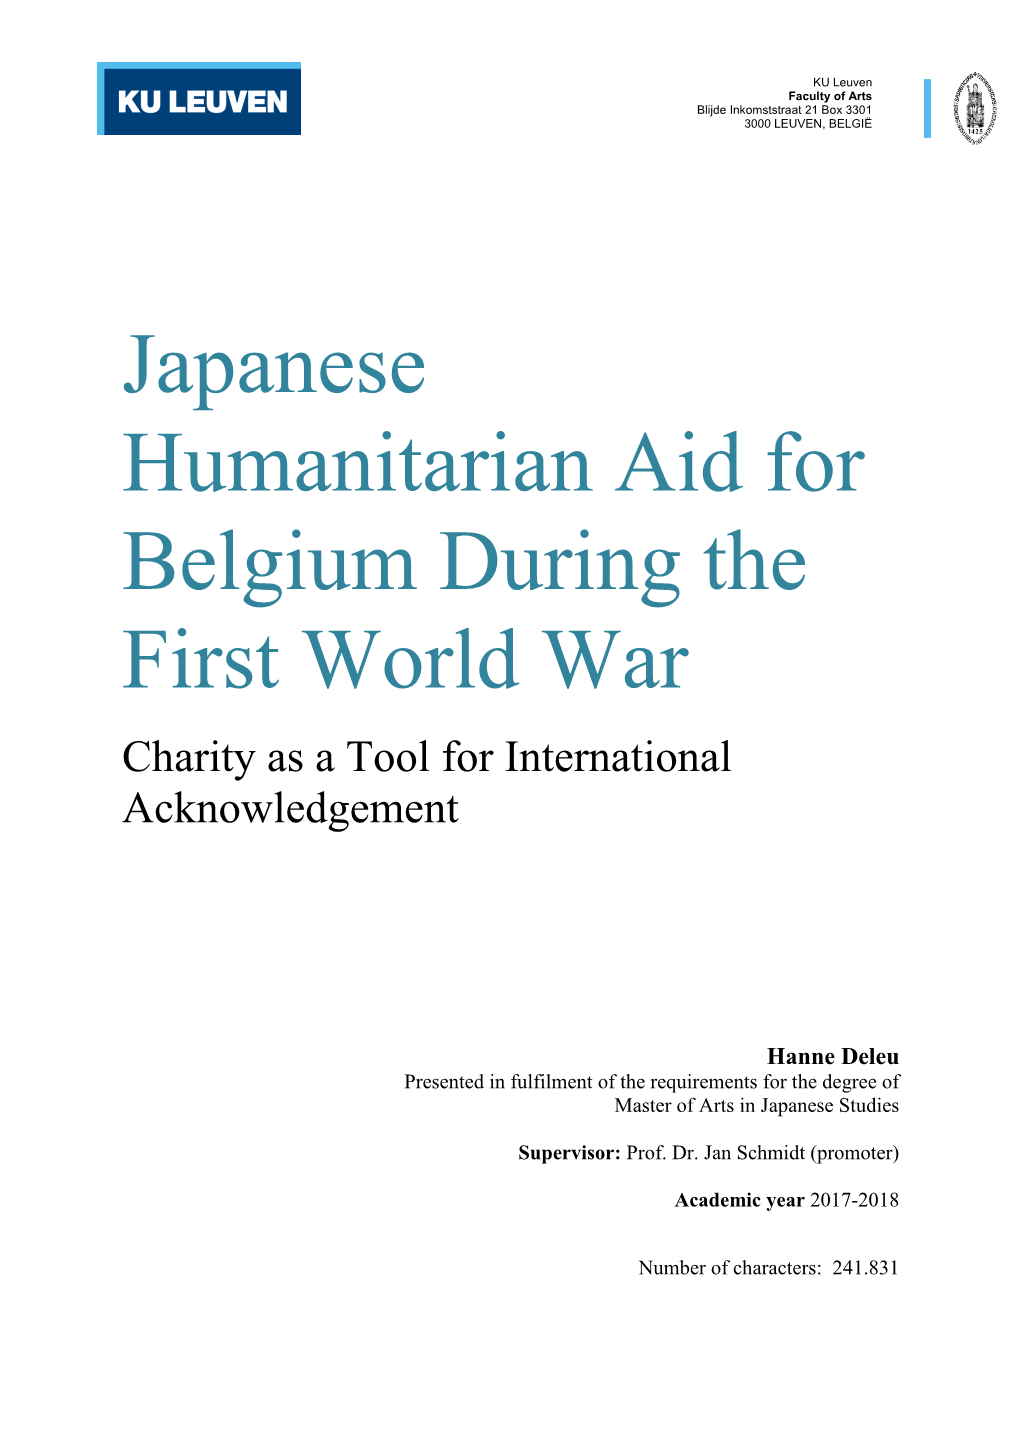 Japanese Humanitarian Aid for Belgium During The